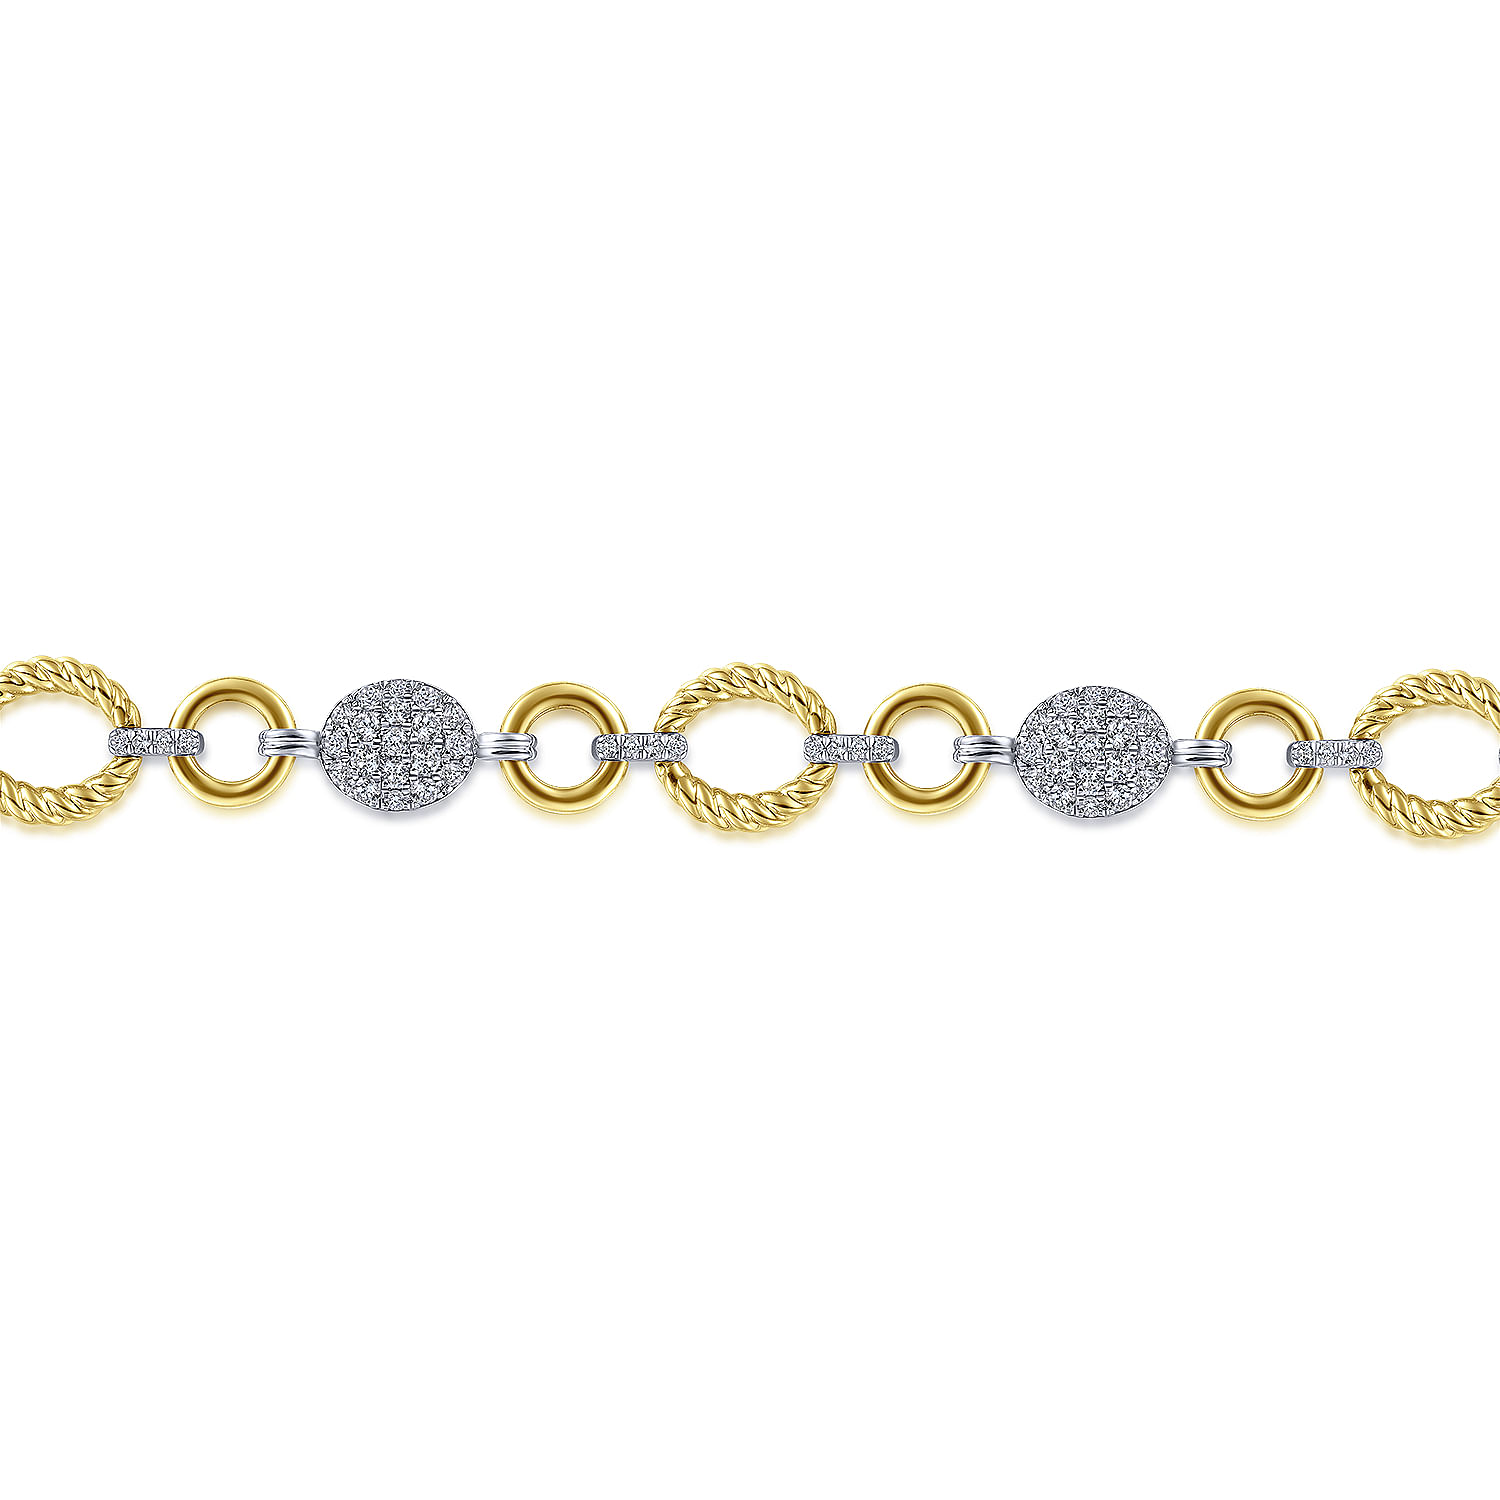 14K Yellow-White Gold Twisted Rope Link Bracelet with Pavé Diamond Cluster Stations